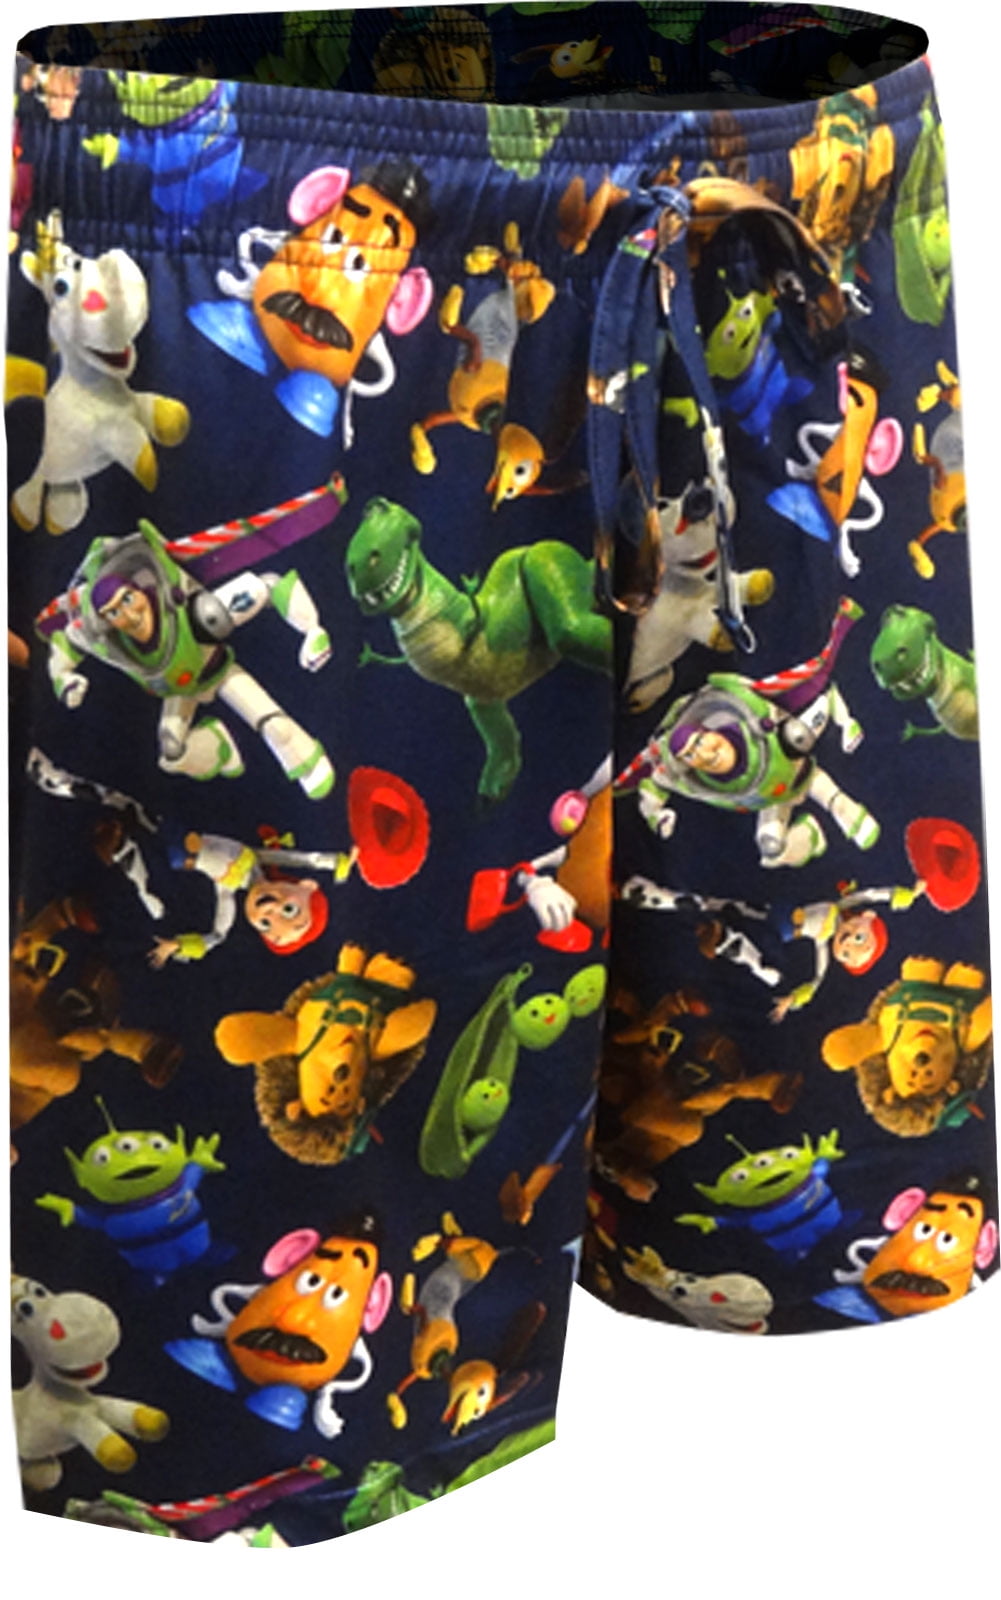 all toy story shorts